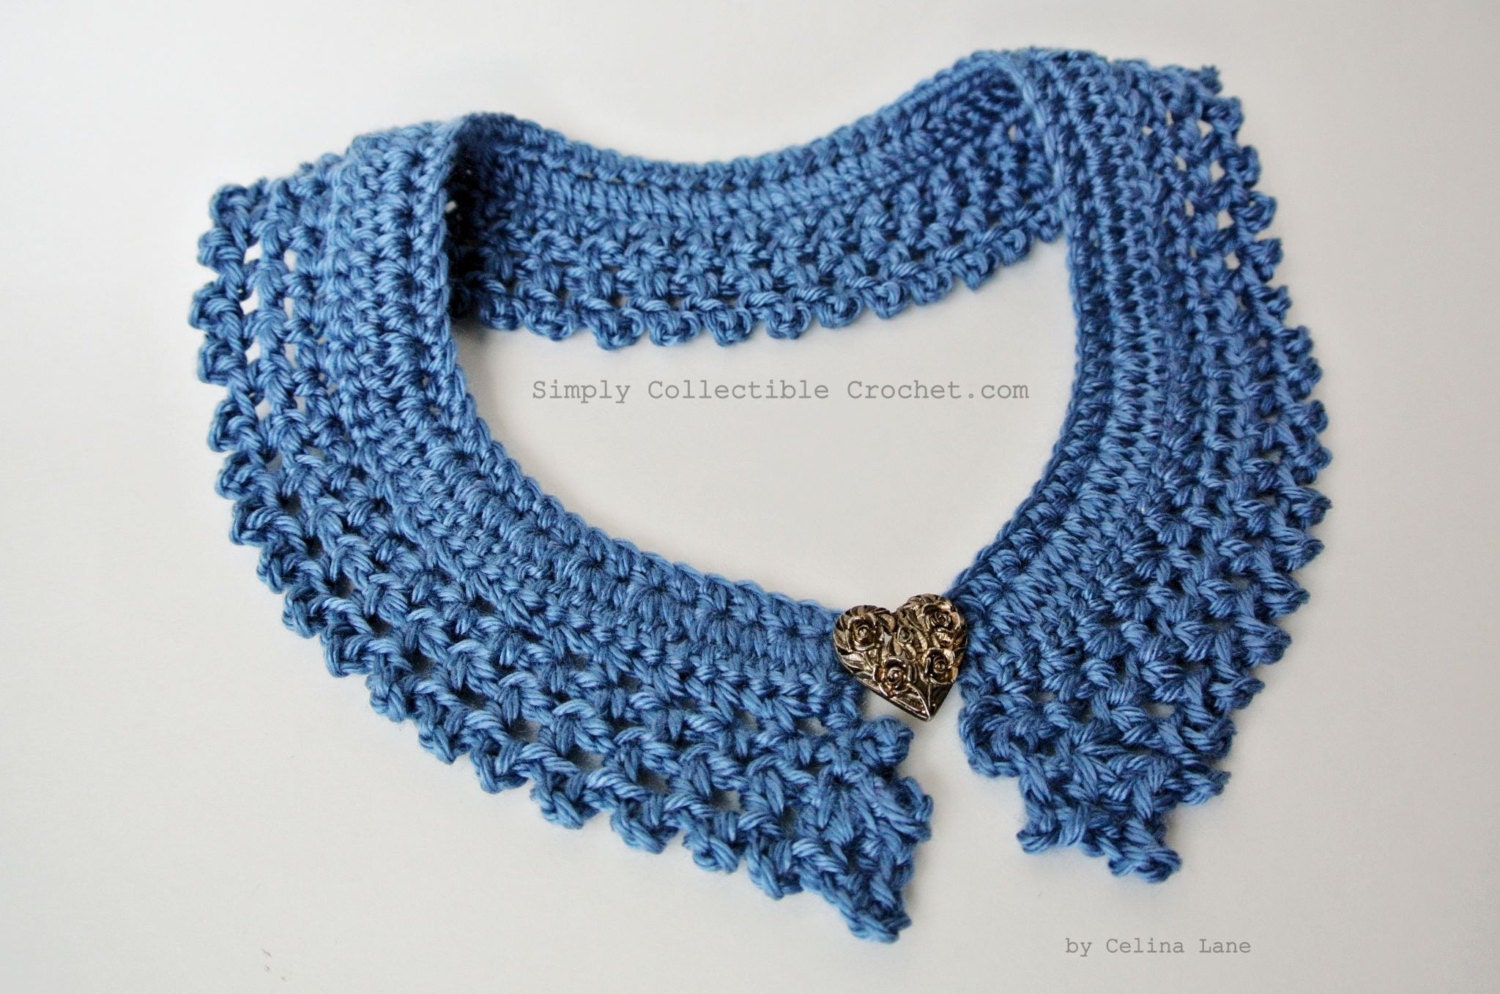 Crochet Pattern Collar Photo Tutorial and Diagram included